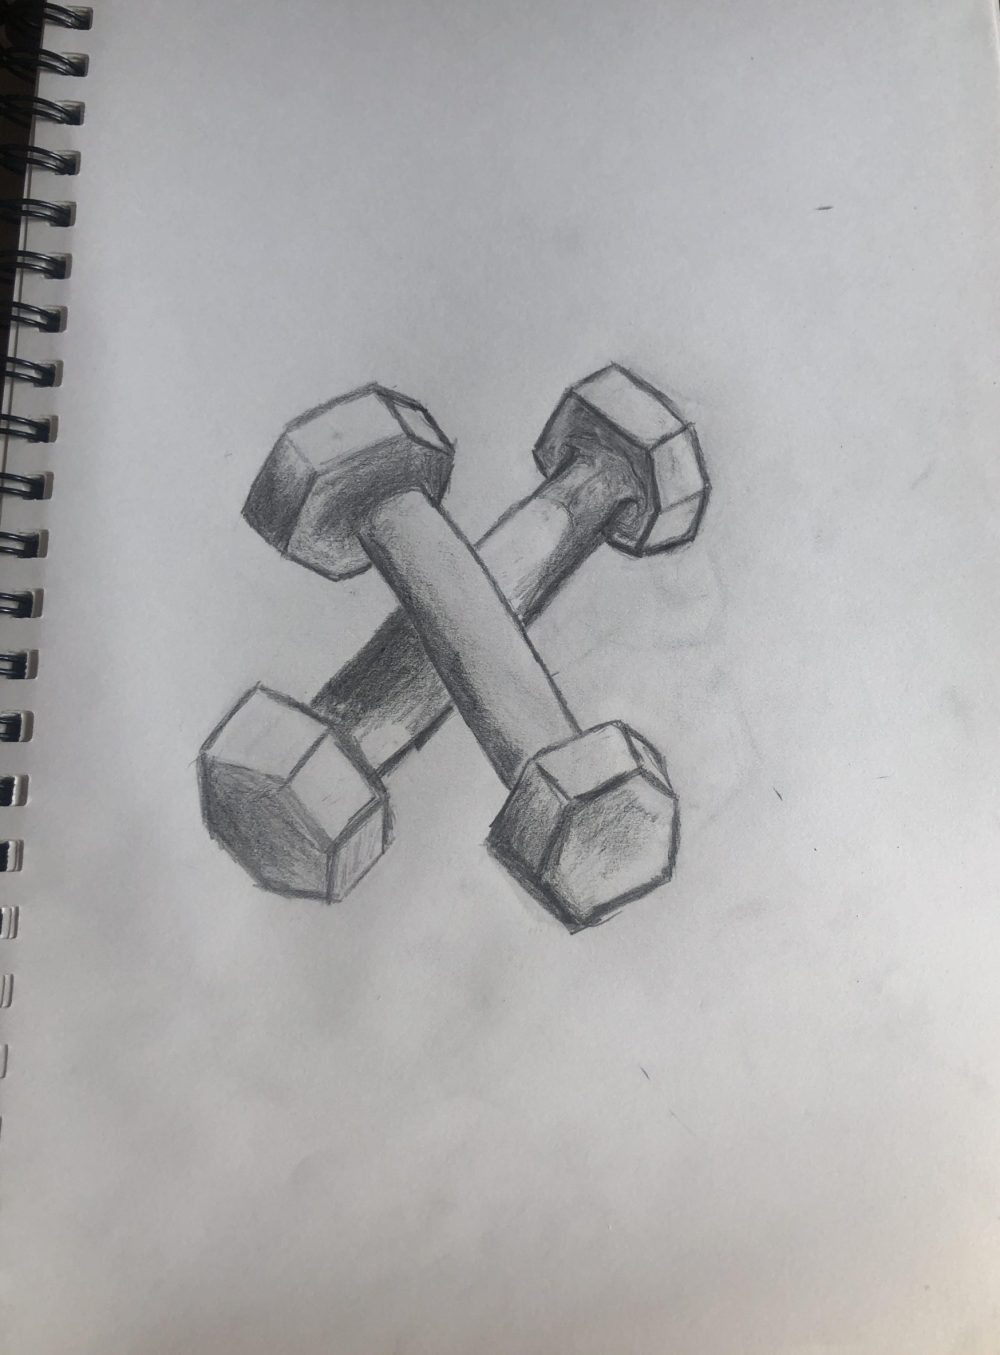 Drawing of two dumbbells, one laying on its side, the other one is crossed.